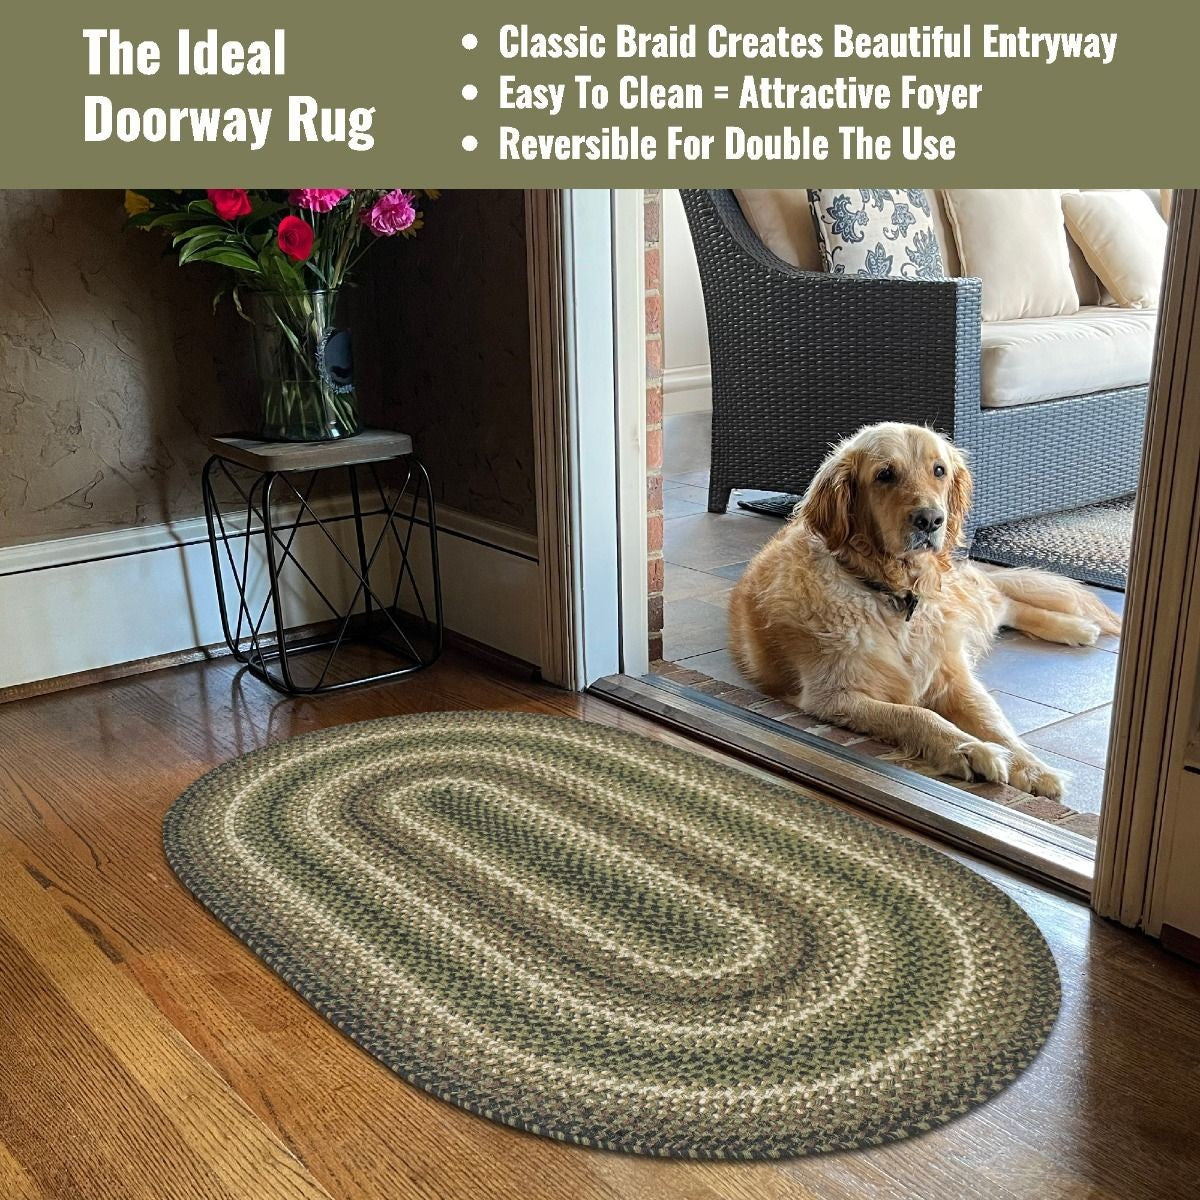 Pinecone Green Oval Jute Braided Rugs